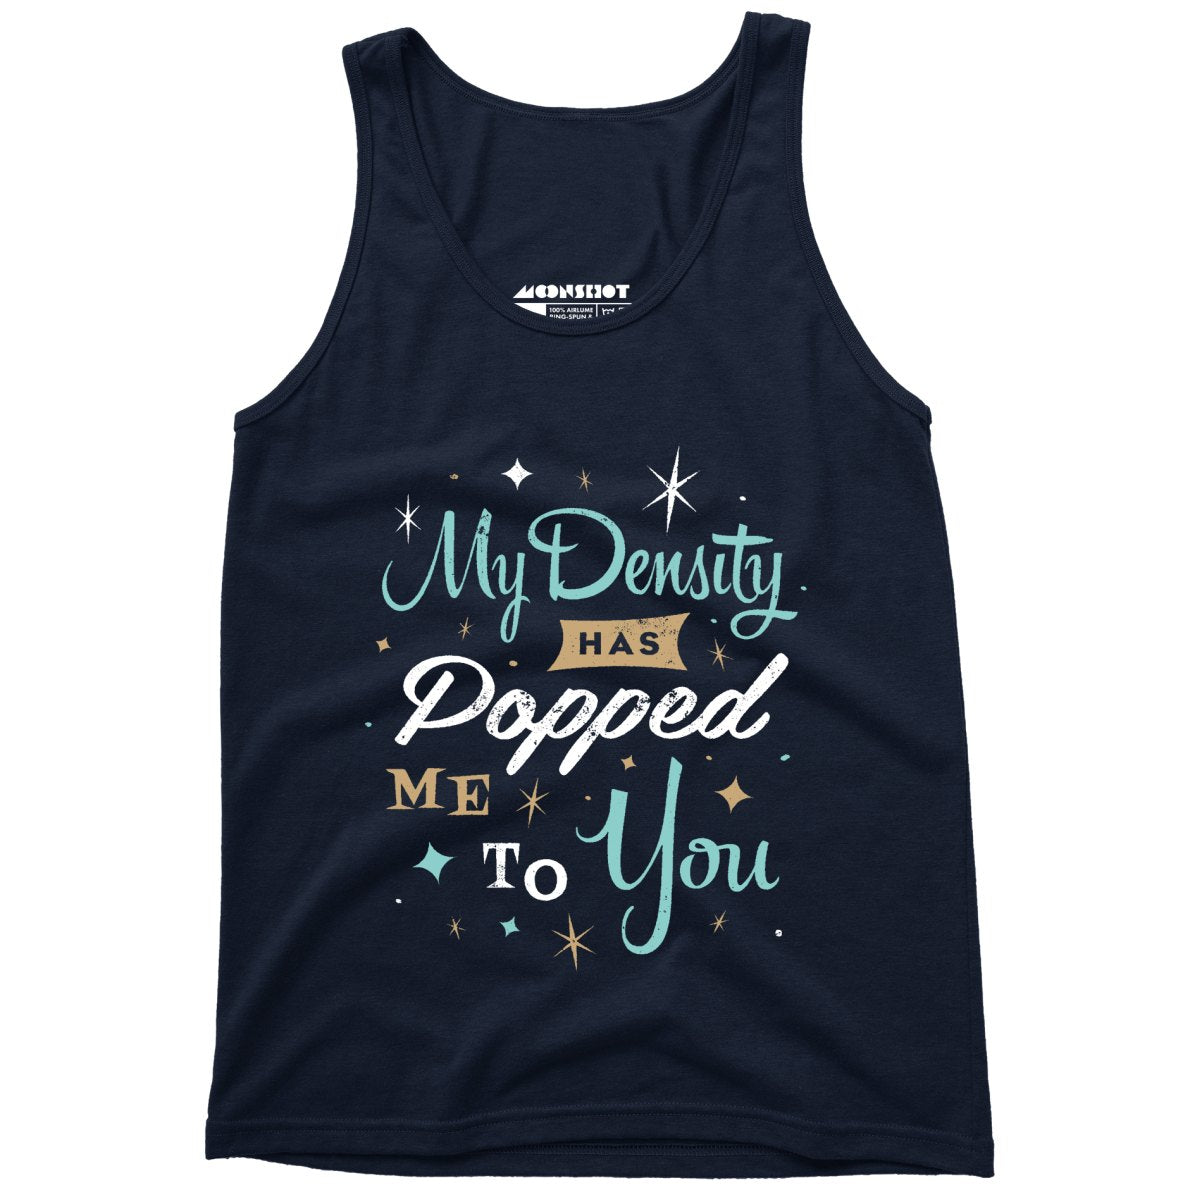 My Density Has Popped Me To You - Unisex Tank Top